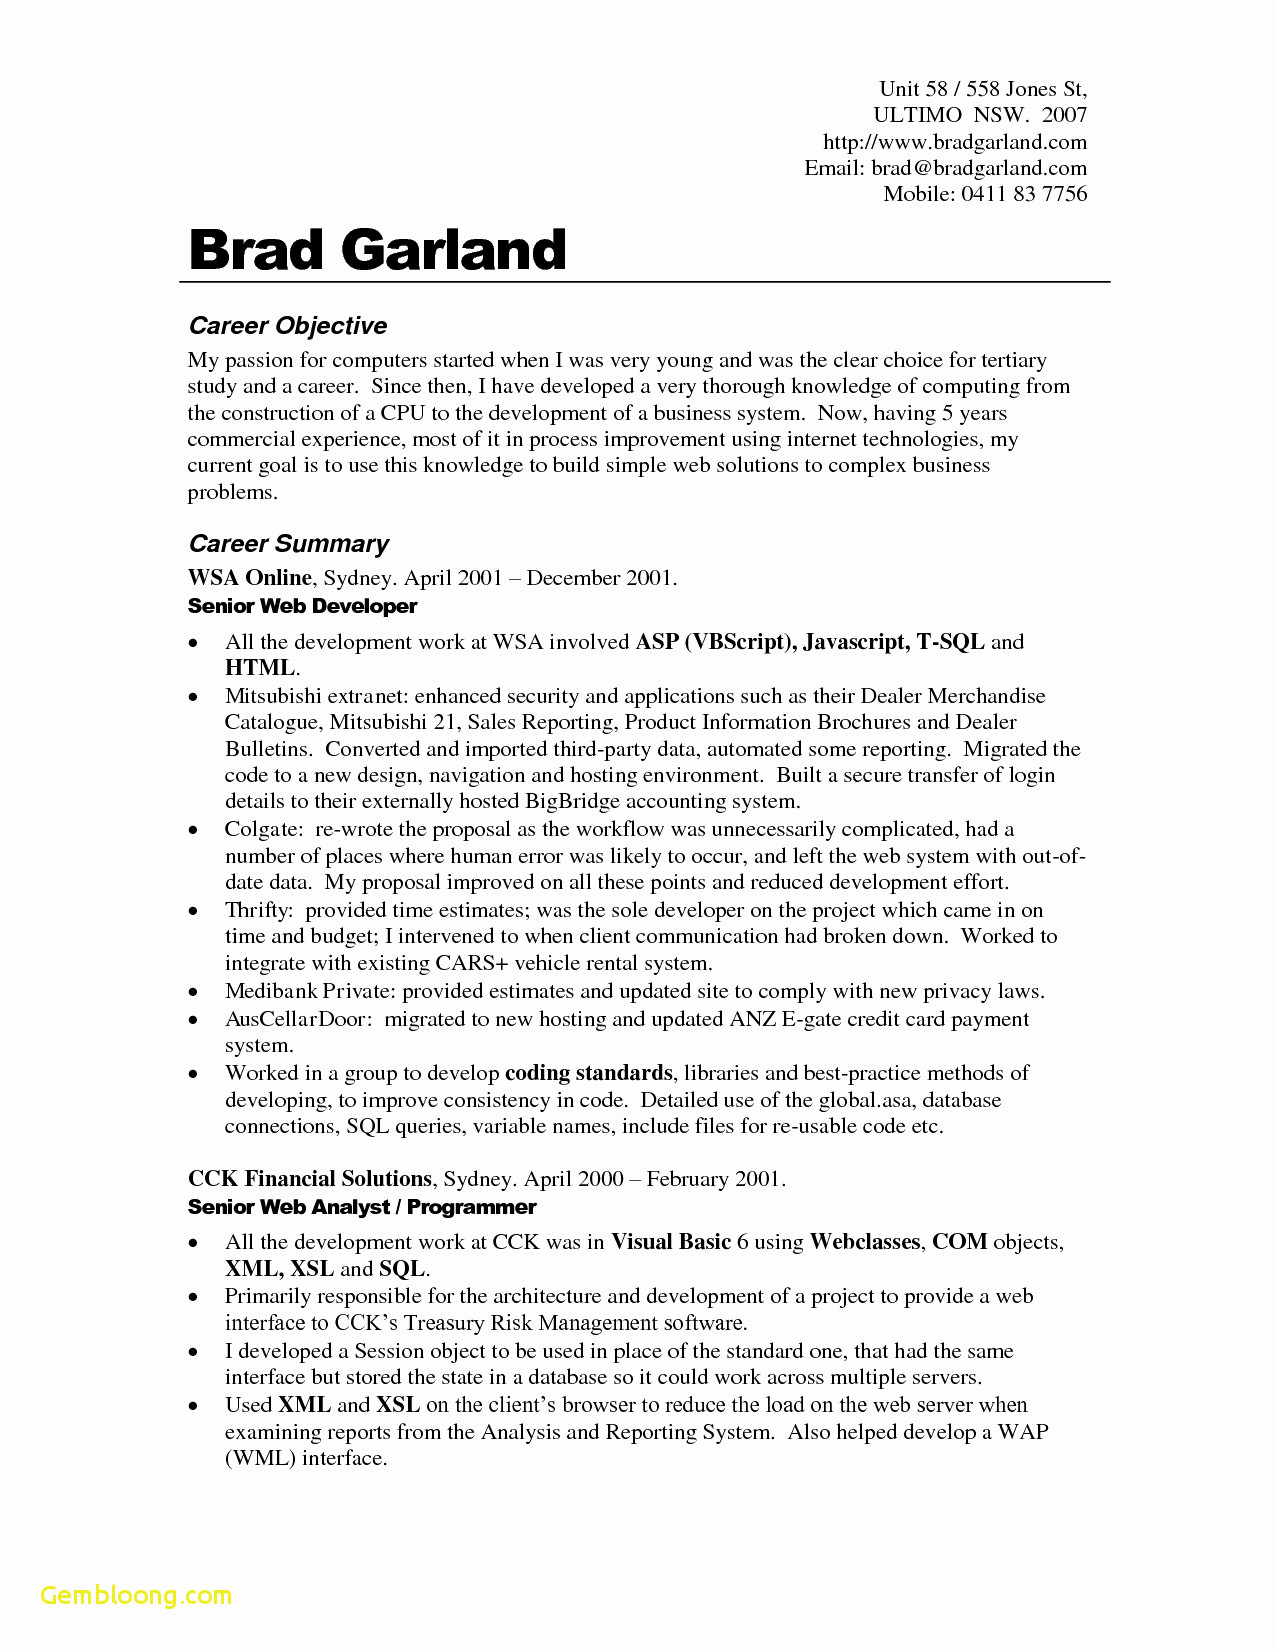 Free Modern Cover Letter Template - Free Modern Resume Template Download Od Consultant Cover Letter